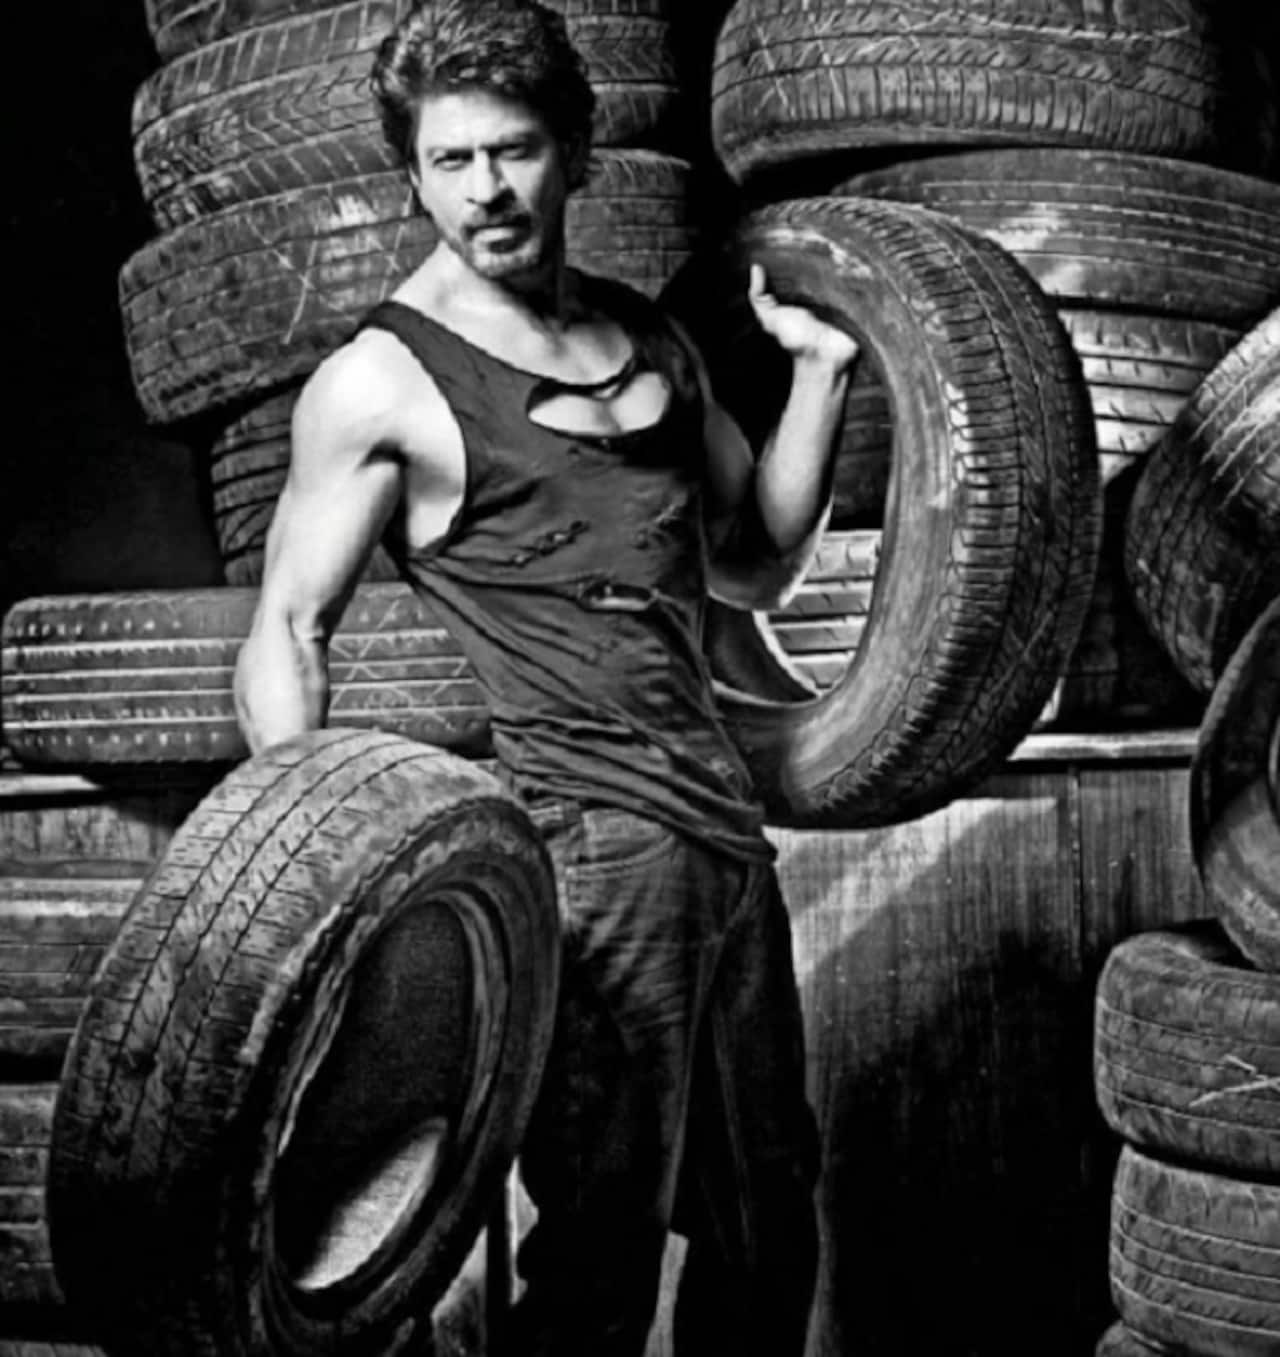 Shah Rukh Khan makes some shocking revelations while shooting for Dabboo Ratnani's 2017 calendar - watch video